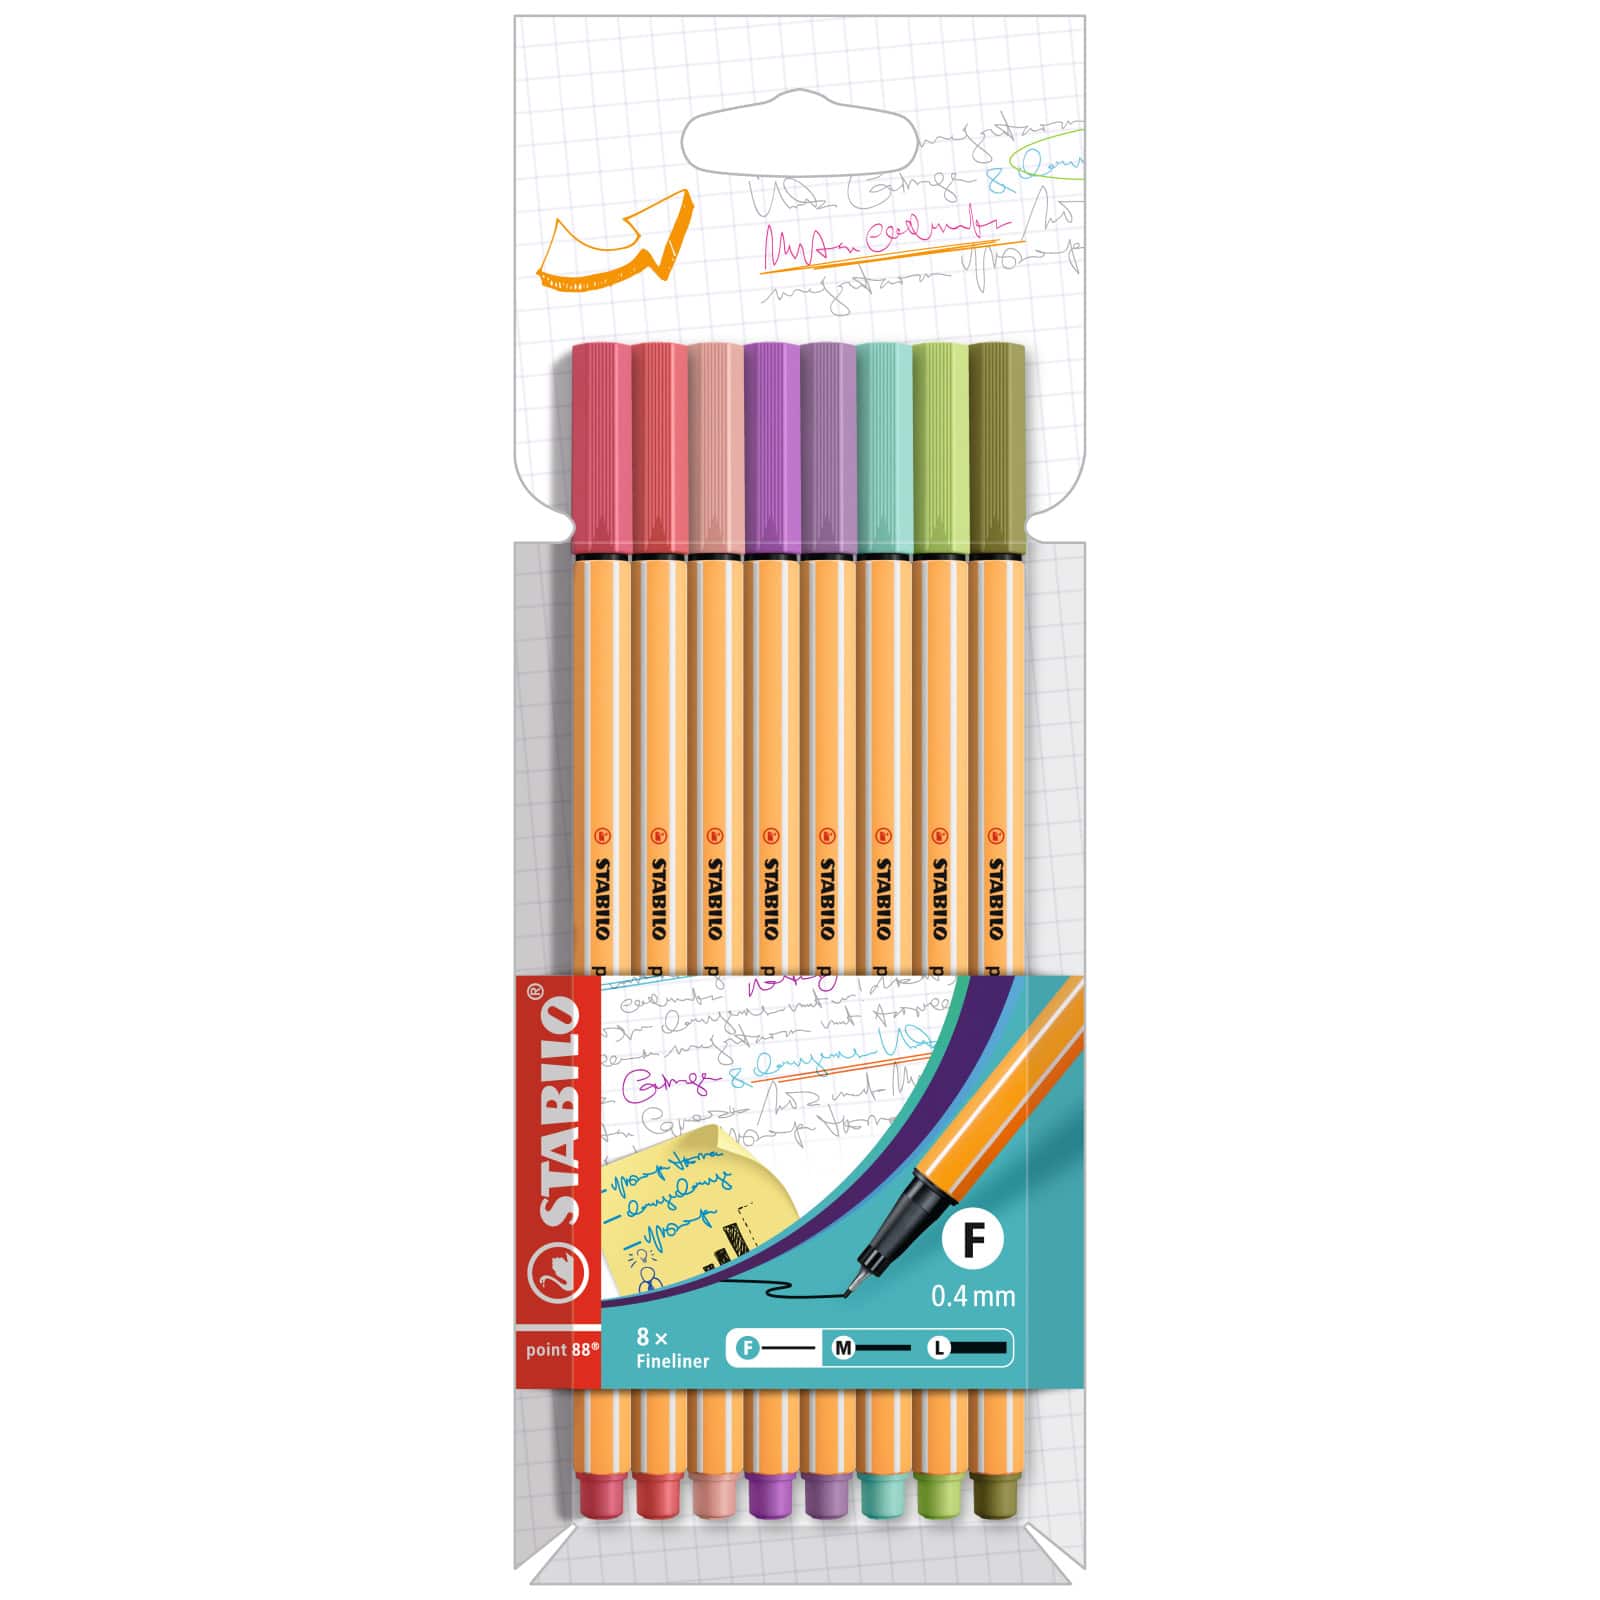 Wallet of 8 Assorted Pastel Colours Stabilo Point 88 Fineliner 88/8-01 